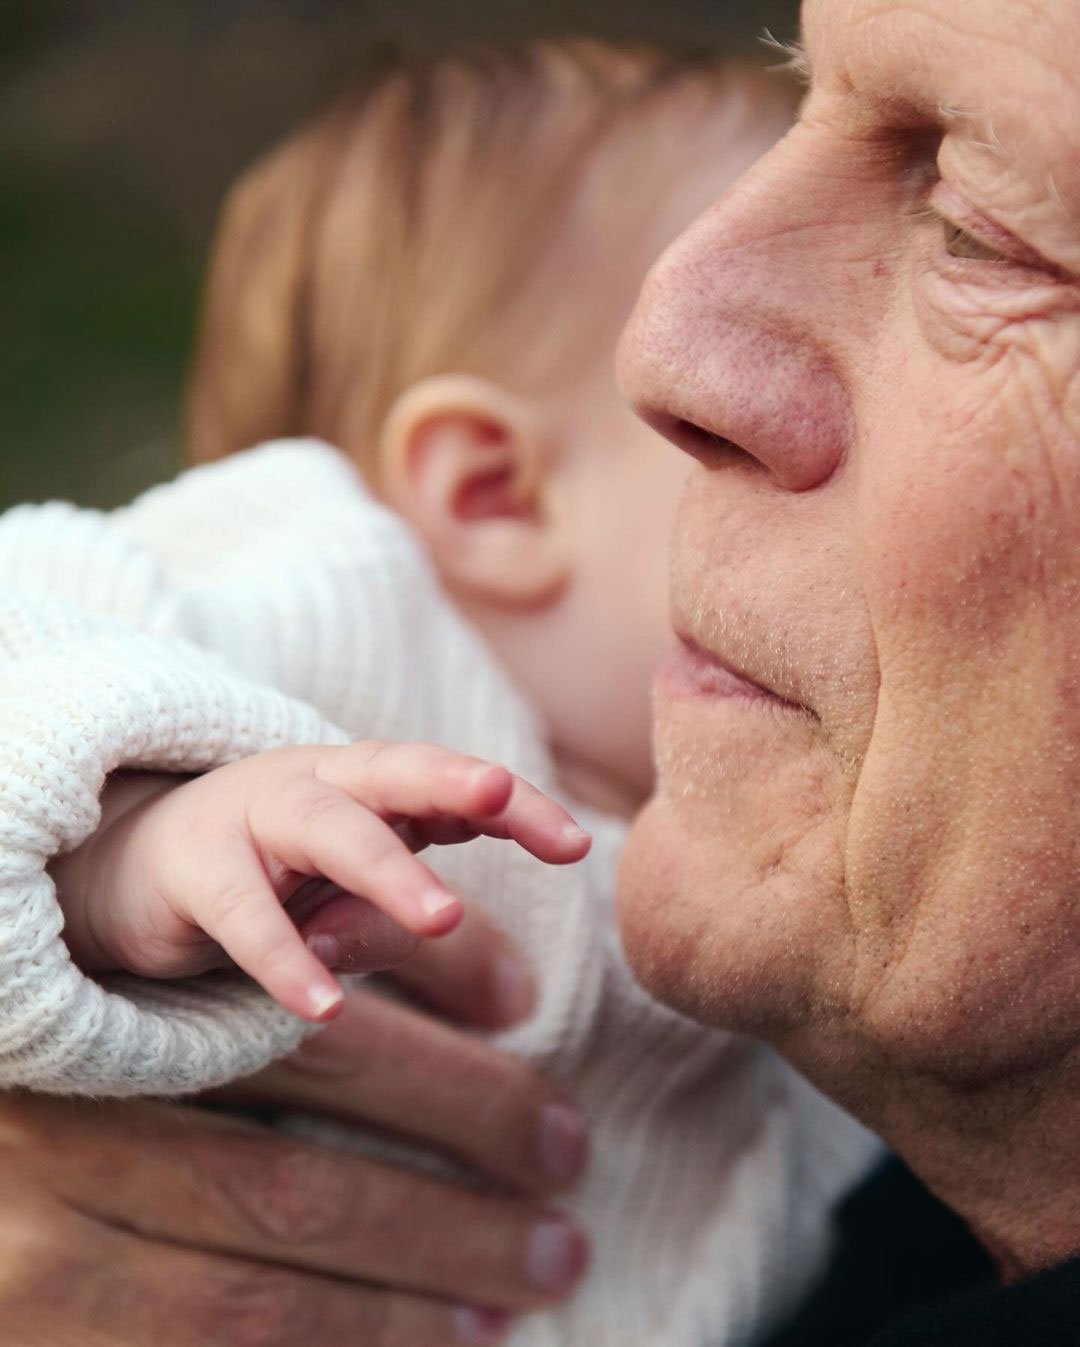 Bruce Willis holds his granddaughter in a stunning shot amidst dementia